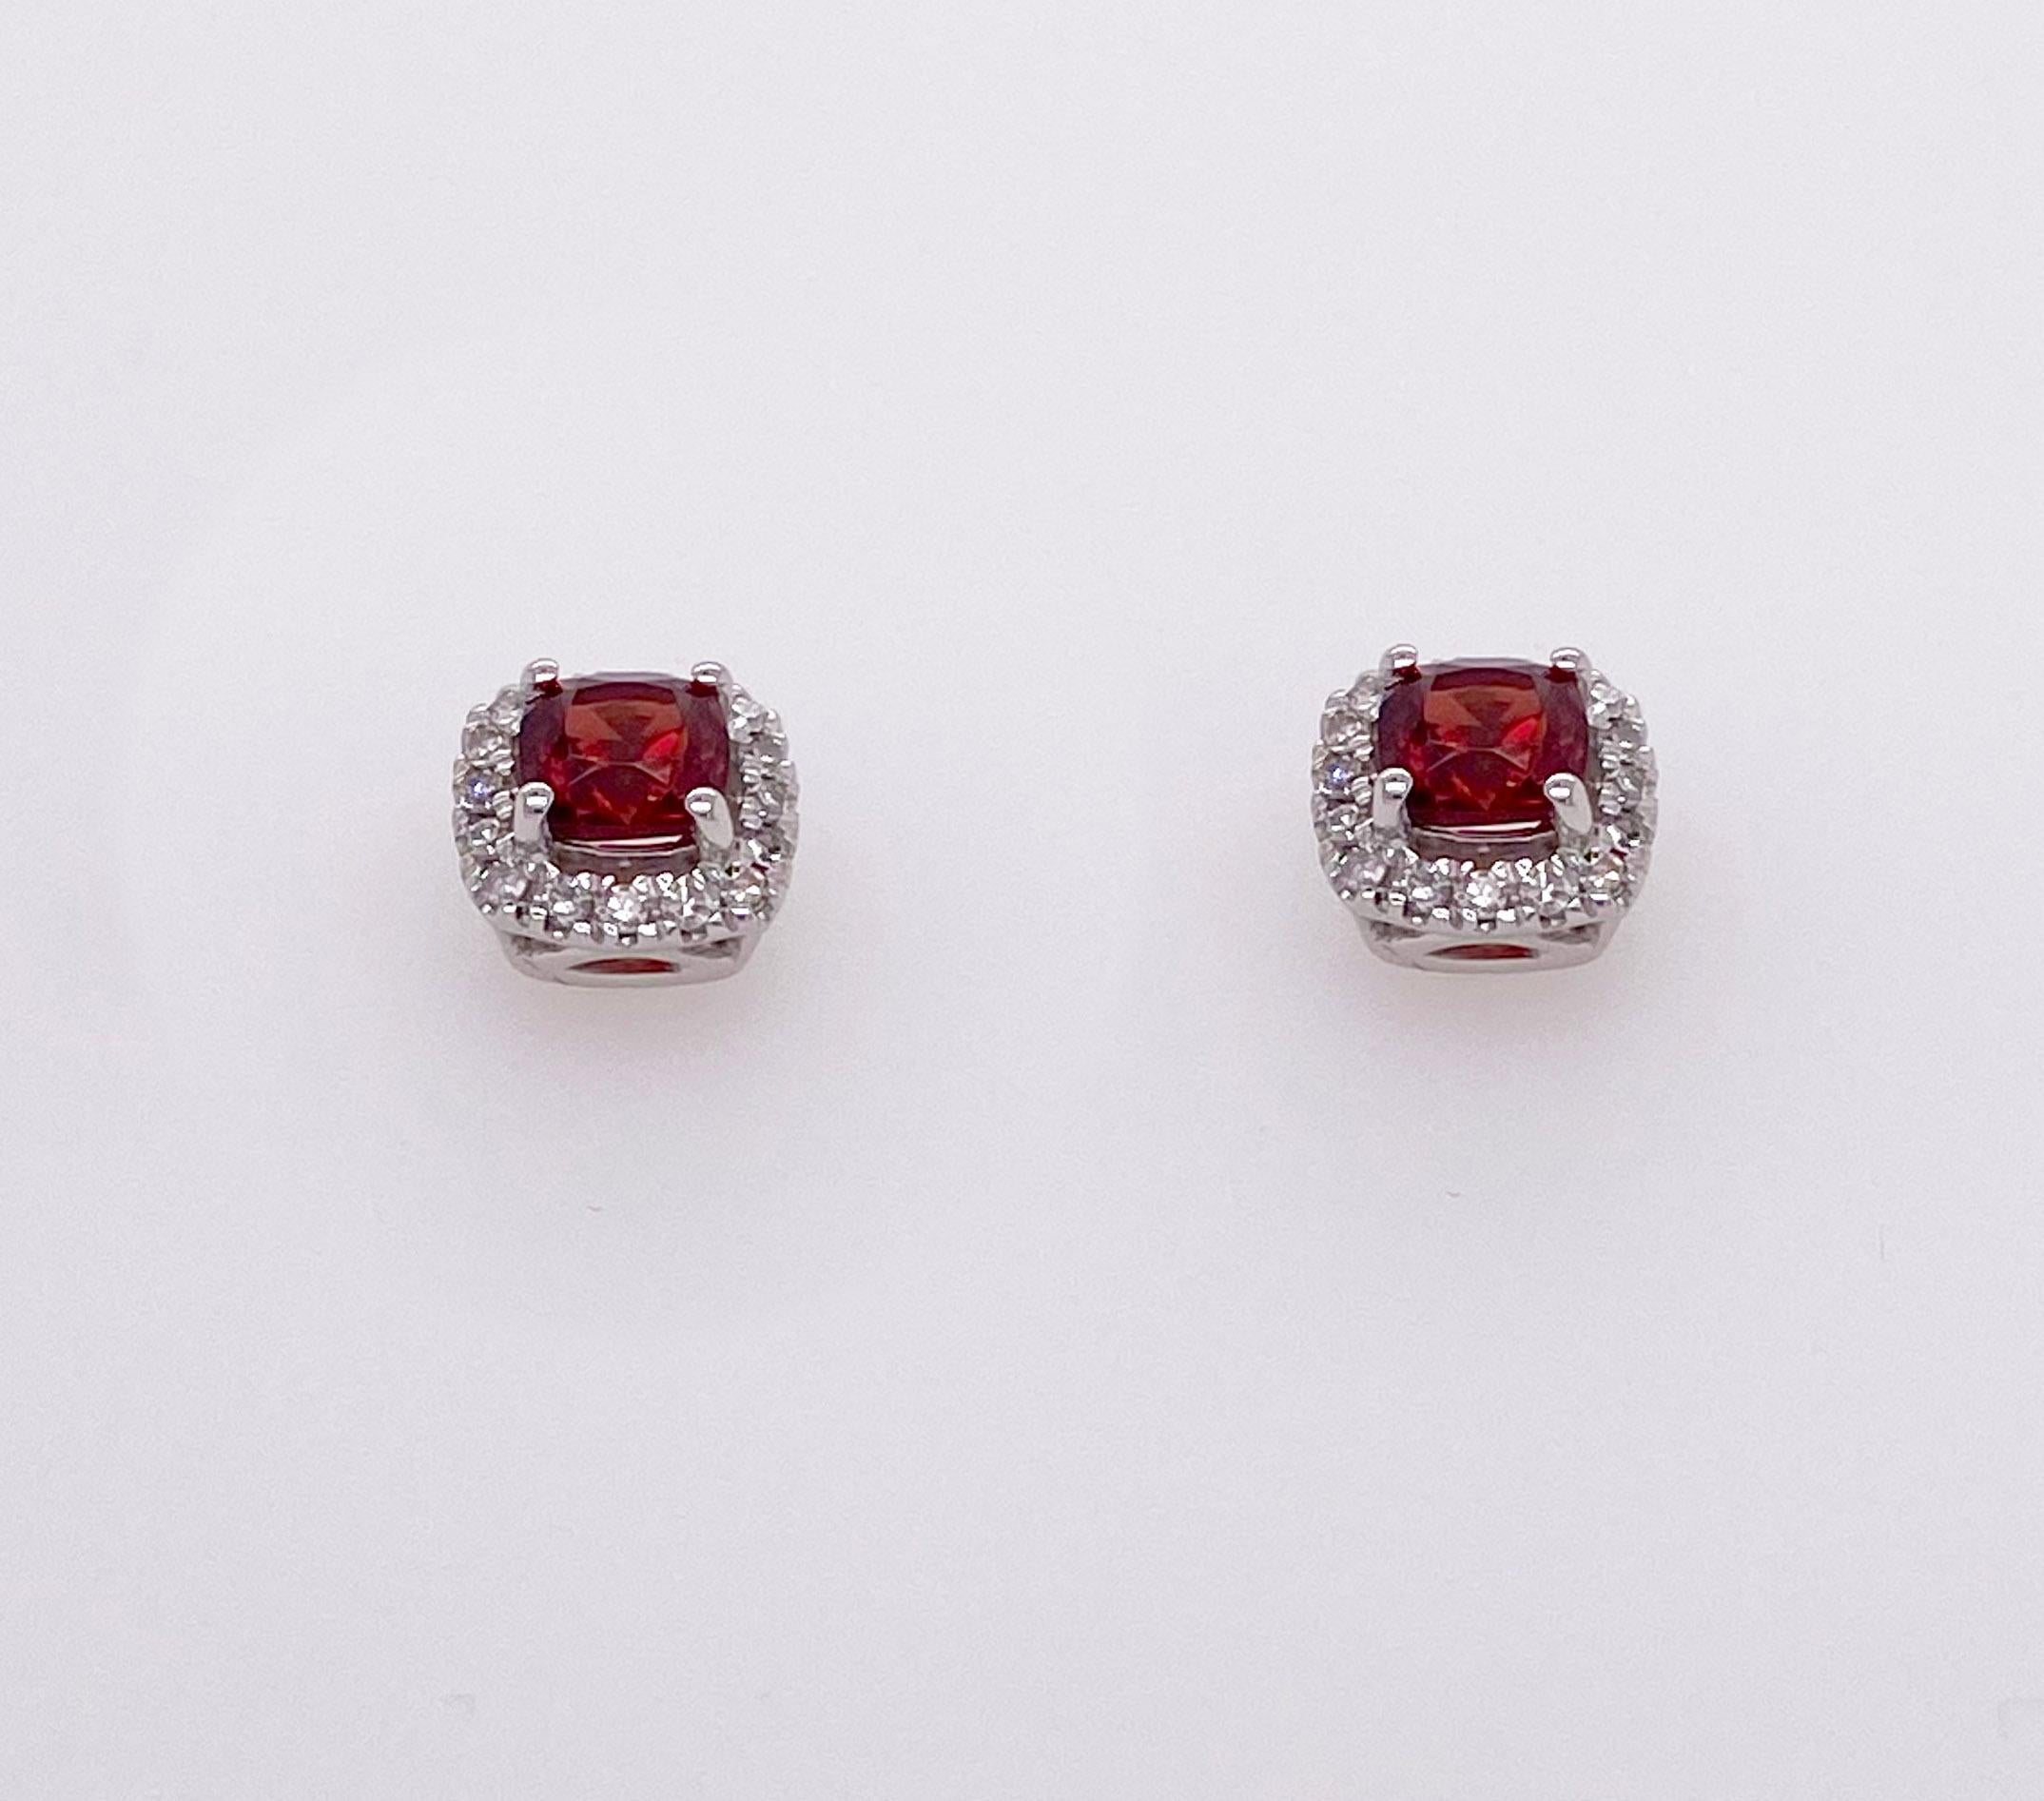 Genuine Natural Red Garnets with Diamonds around!  An amazing stud style earring!
The details for these gorgeous earrings are listed below:
Metal Quality: Sterling Silver 
Earring Type: Stud 
Diamond Number: 15 
Diamond Total Weight: .10